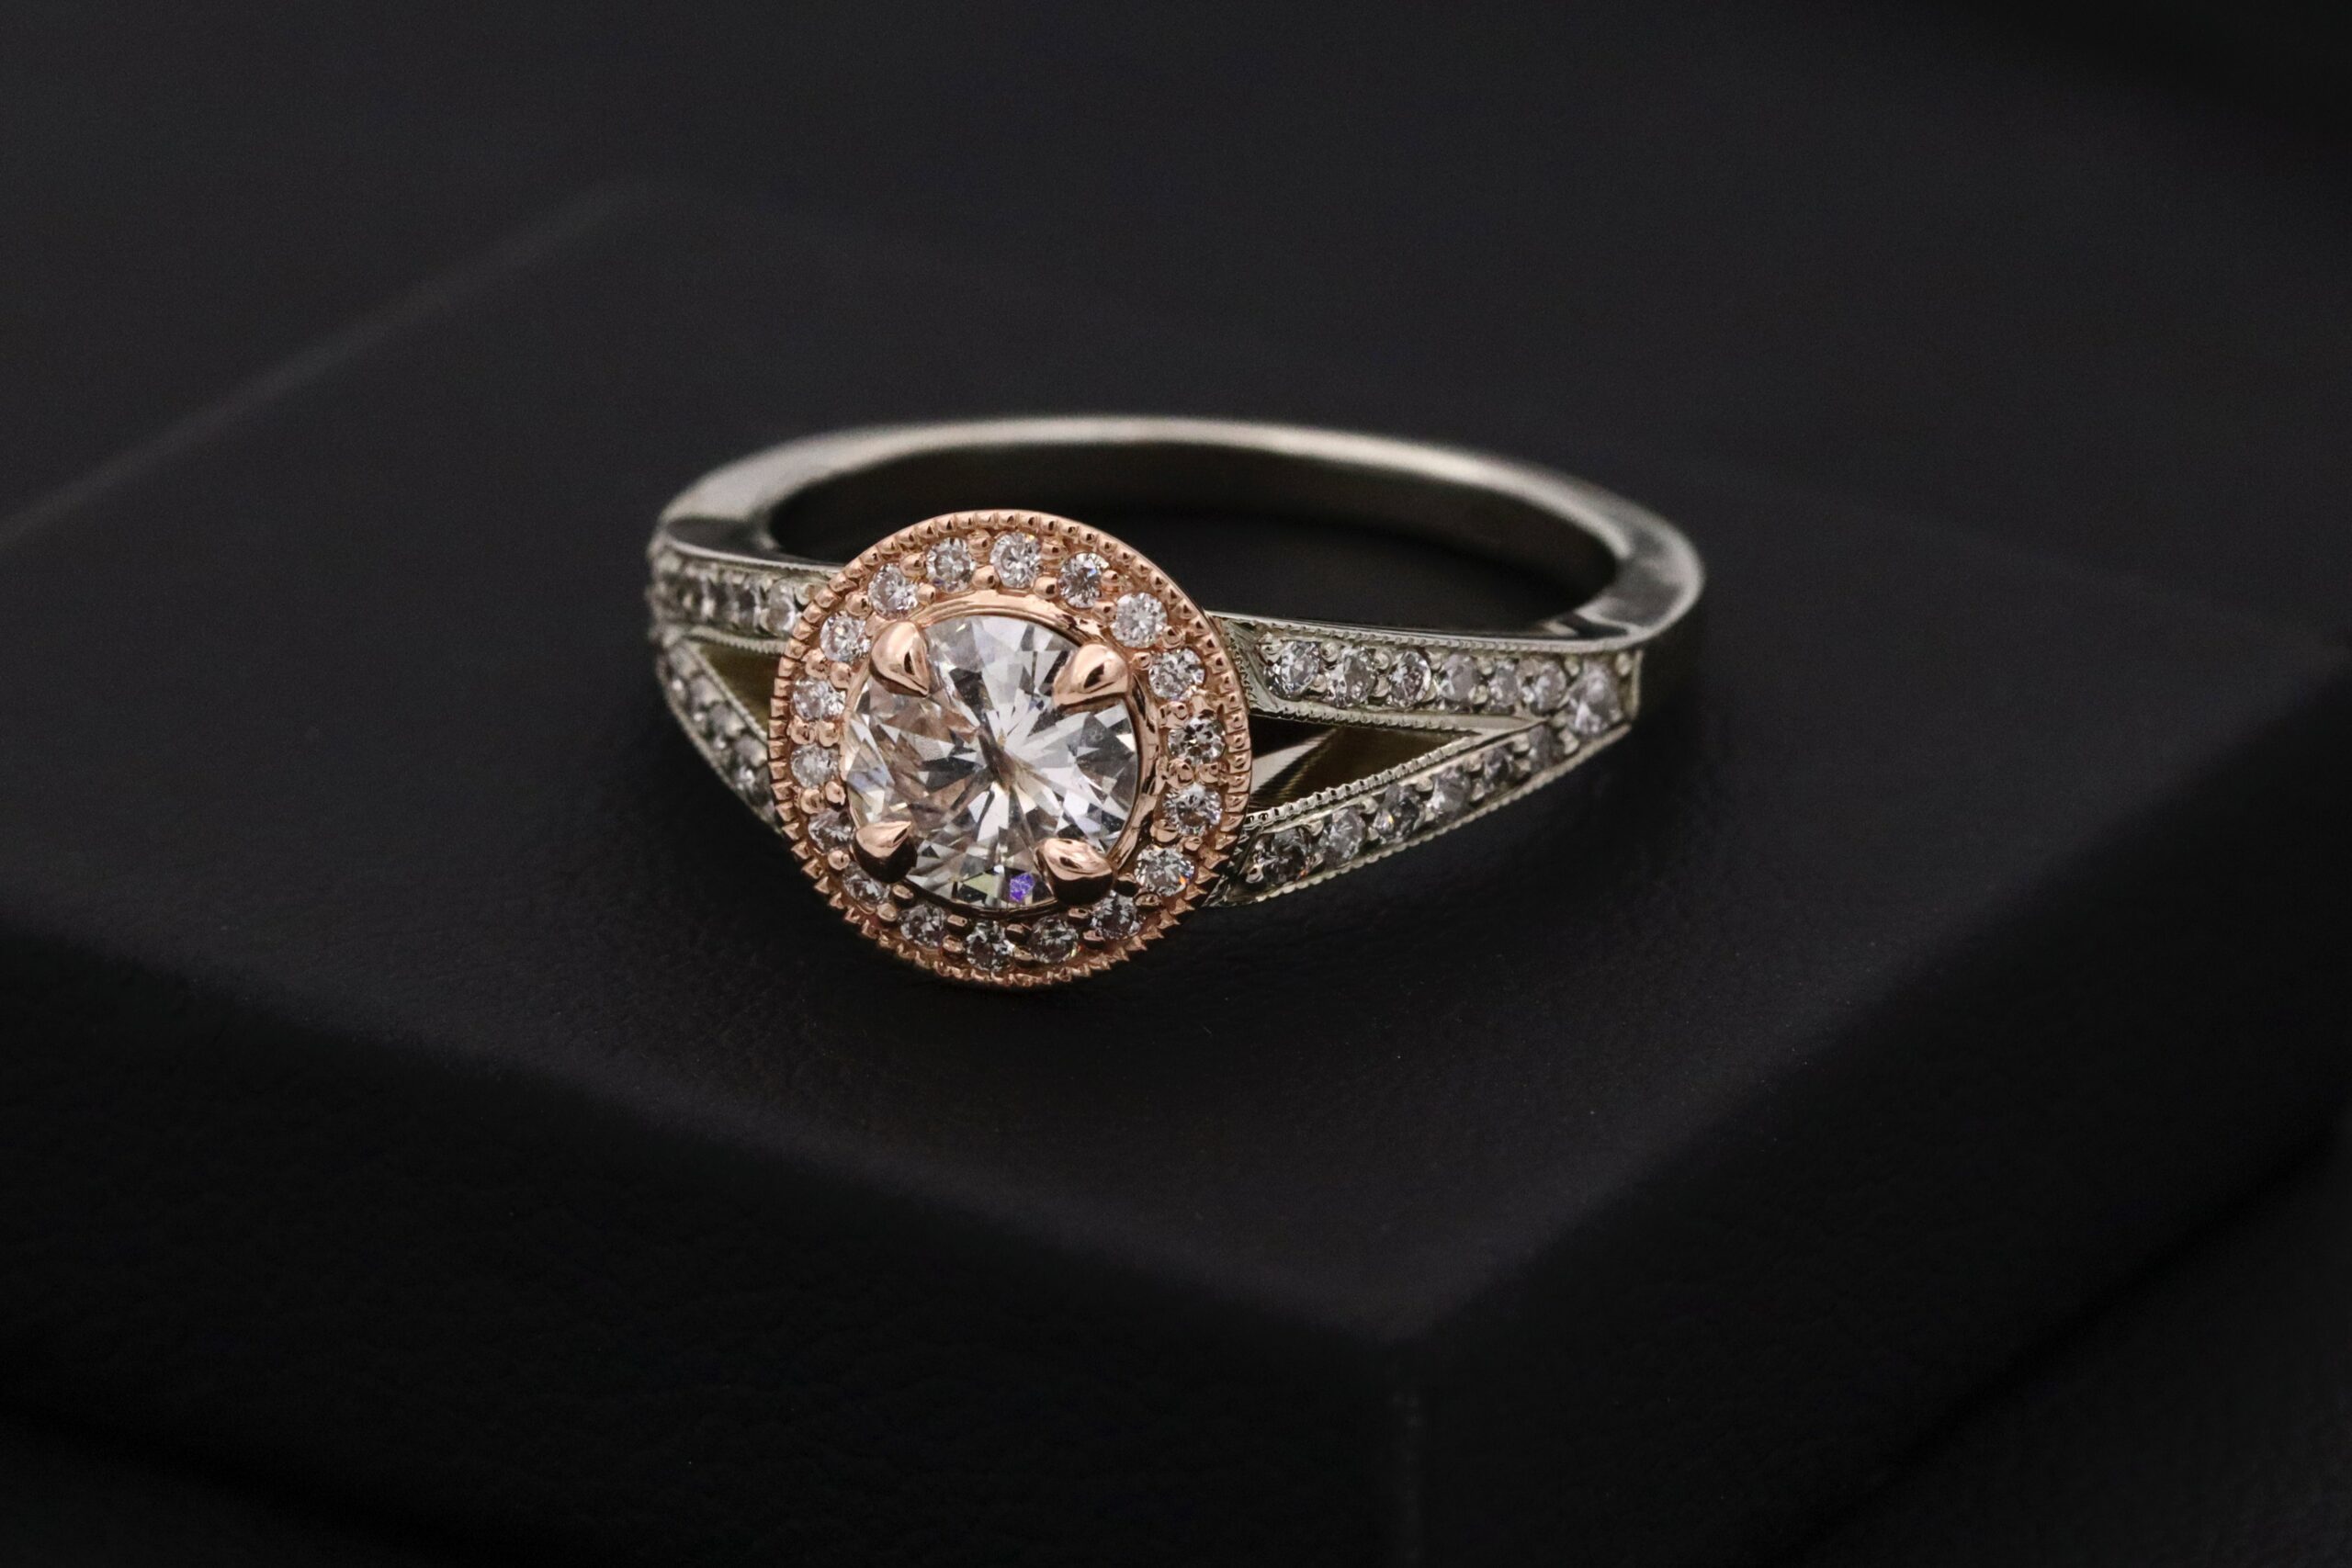 Sparkling ring - diamonds and gold